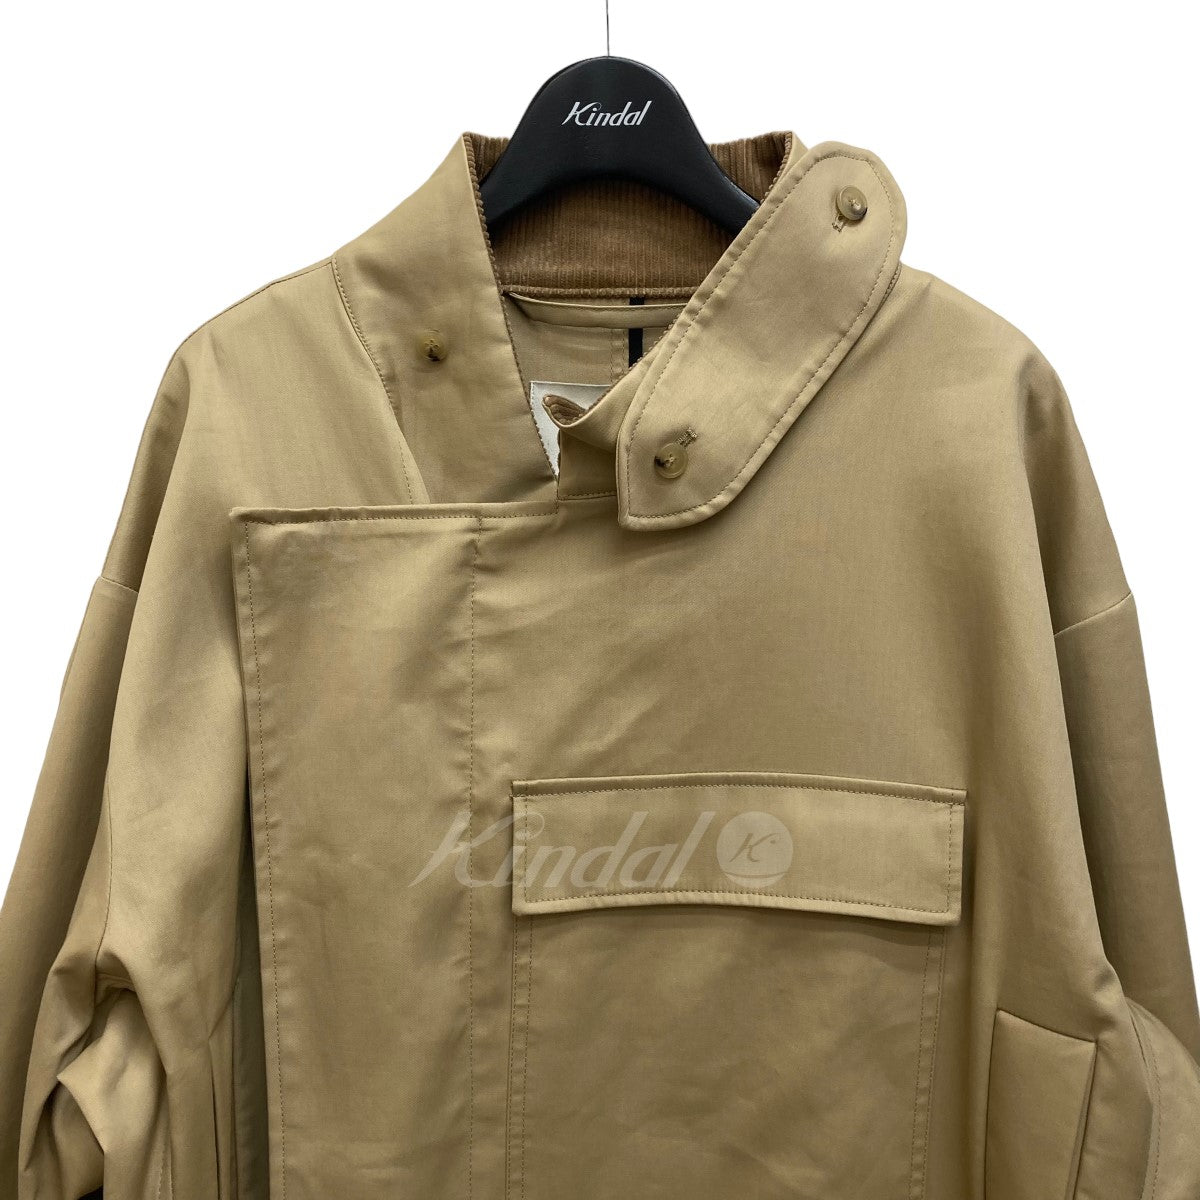 AF AGGER(エーエフ アガー) WATER RESISTANT TWILLCOAT トレンチコート 